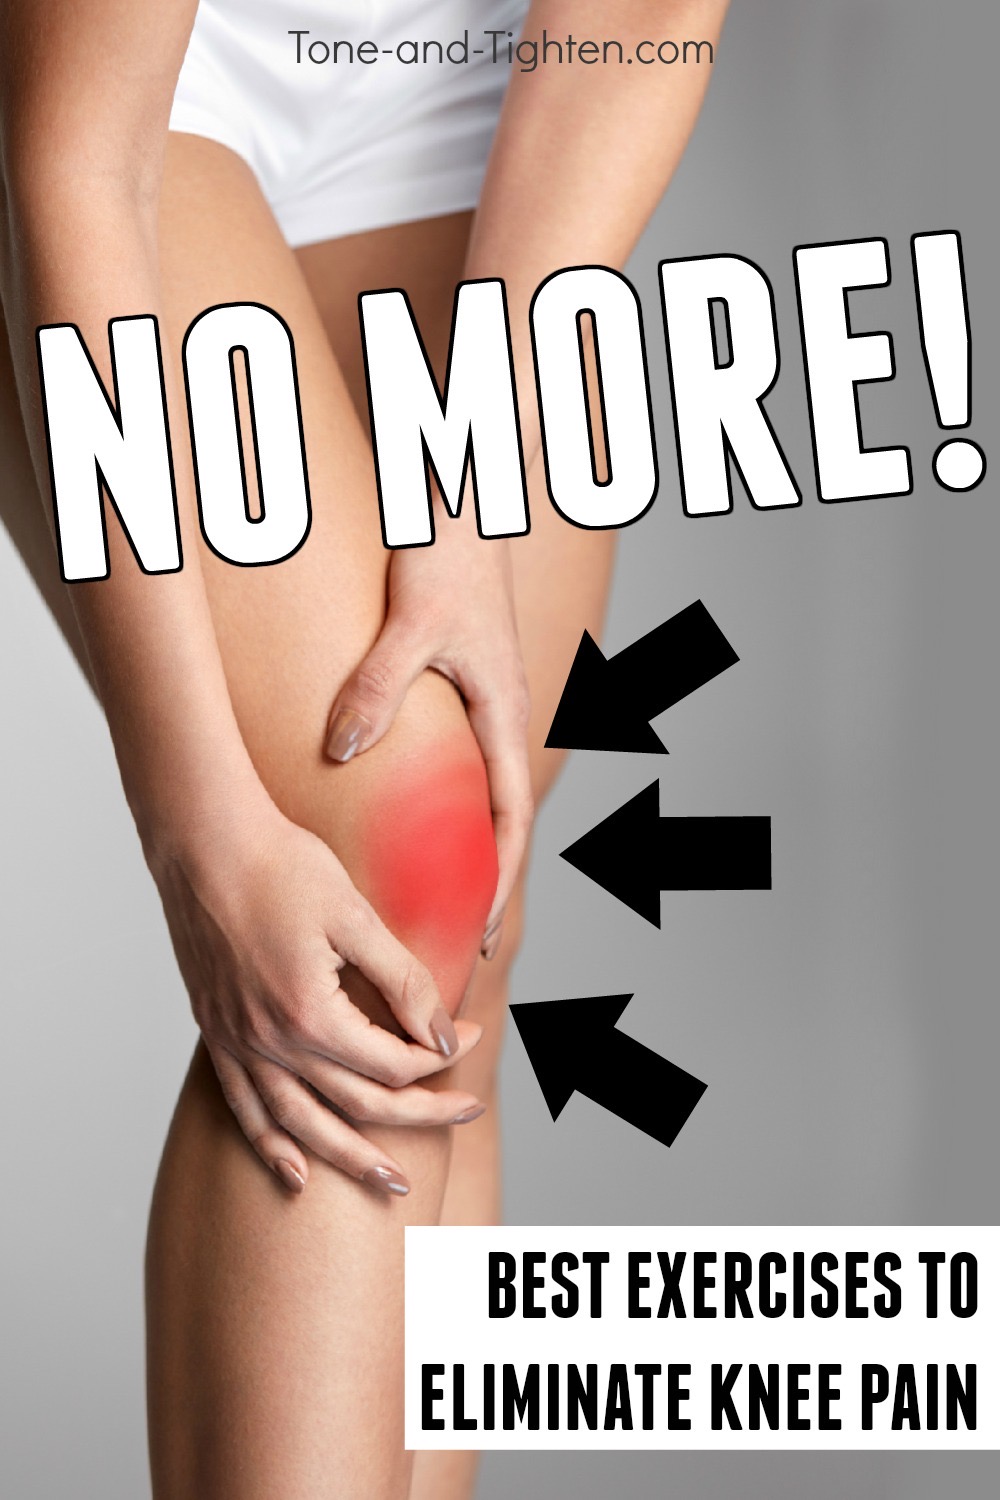 how to stop knee pain at home with exercises from a physical therapist